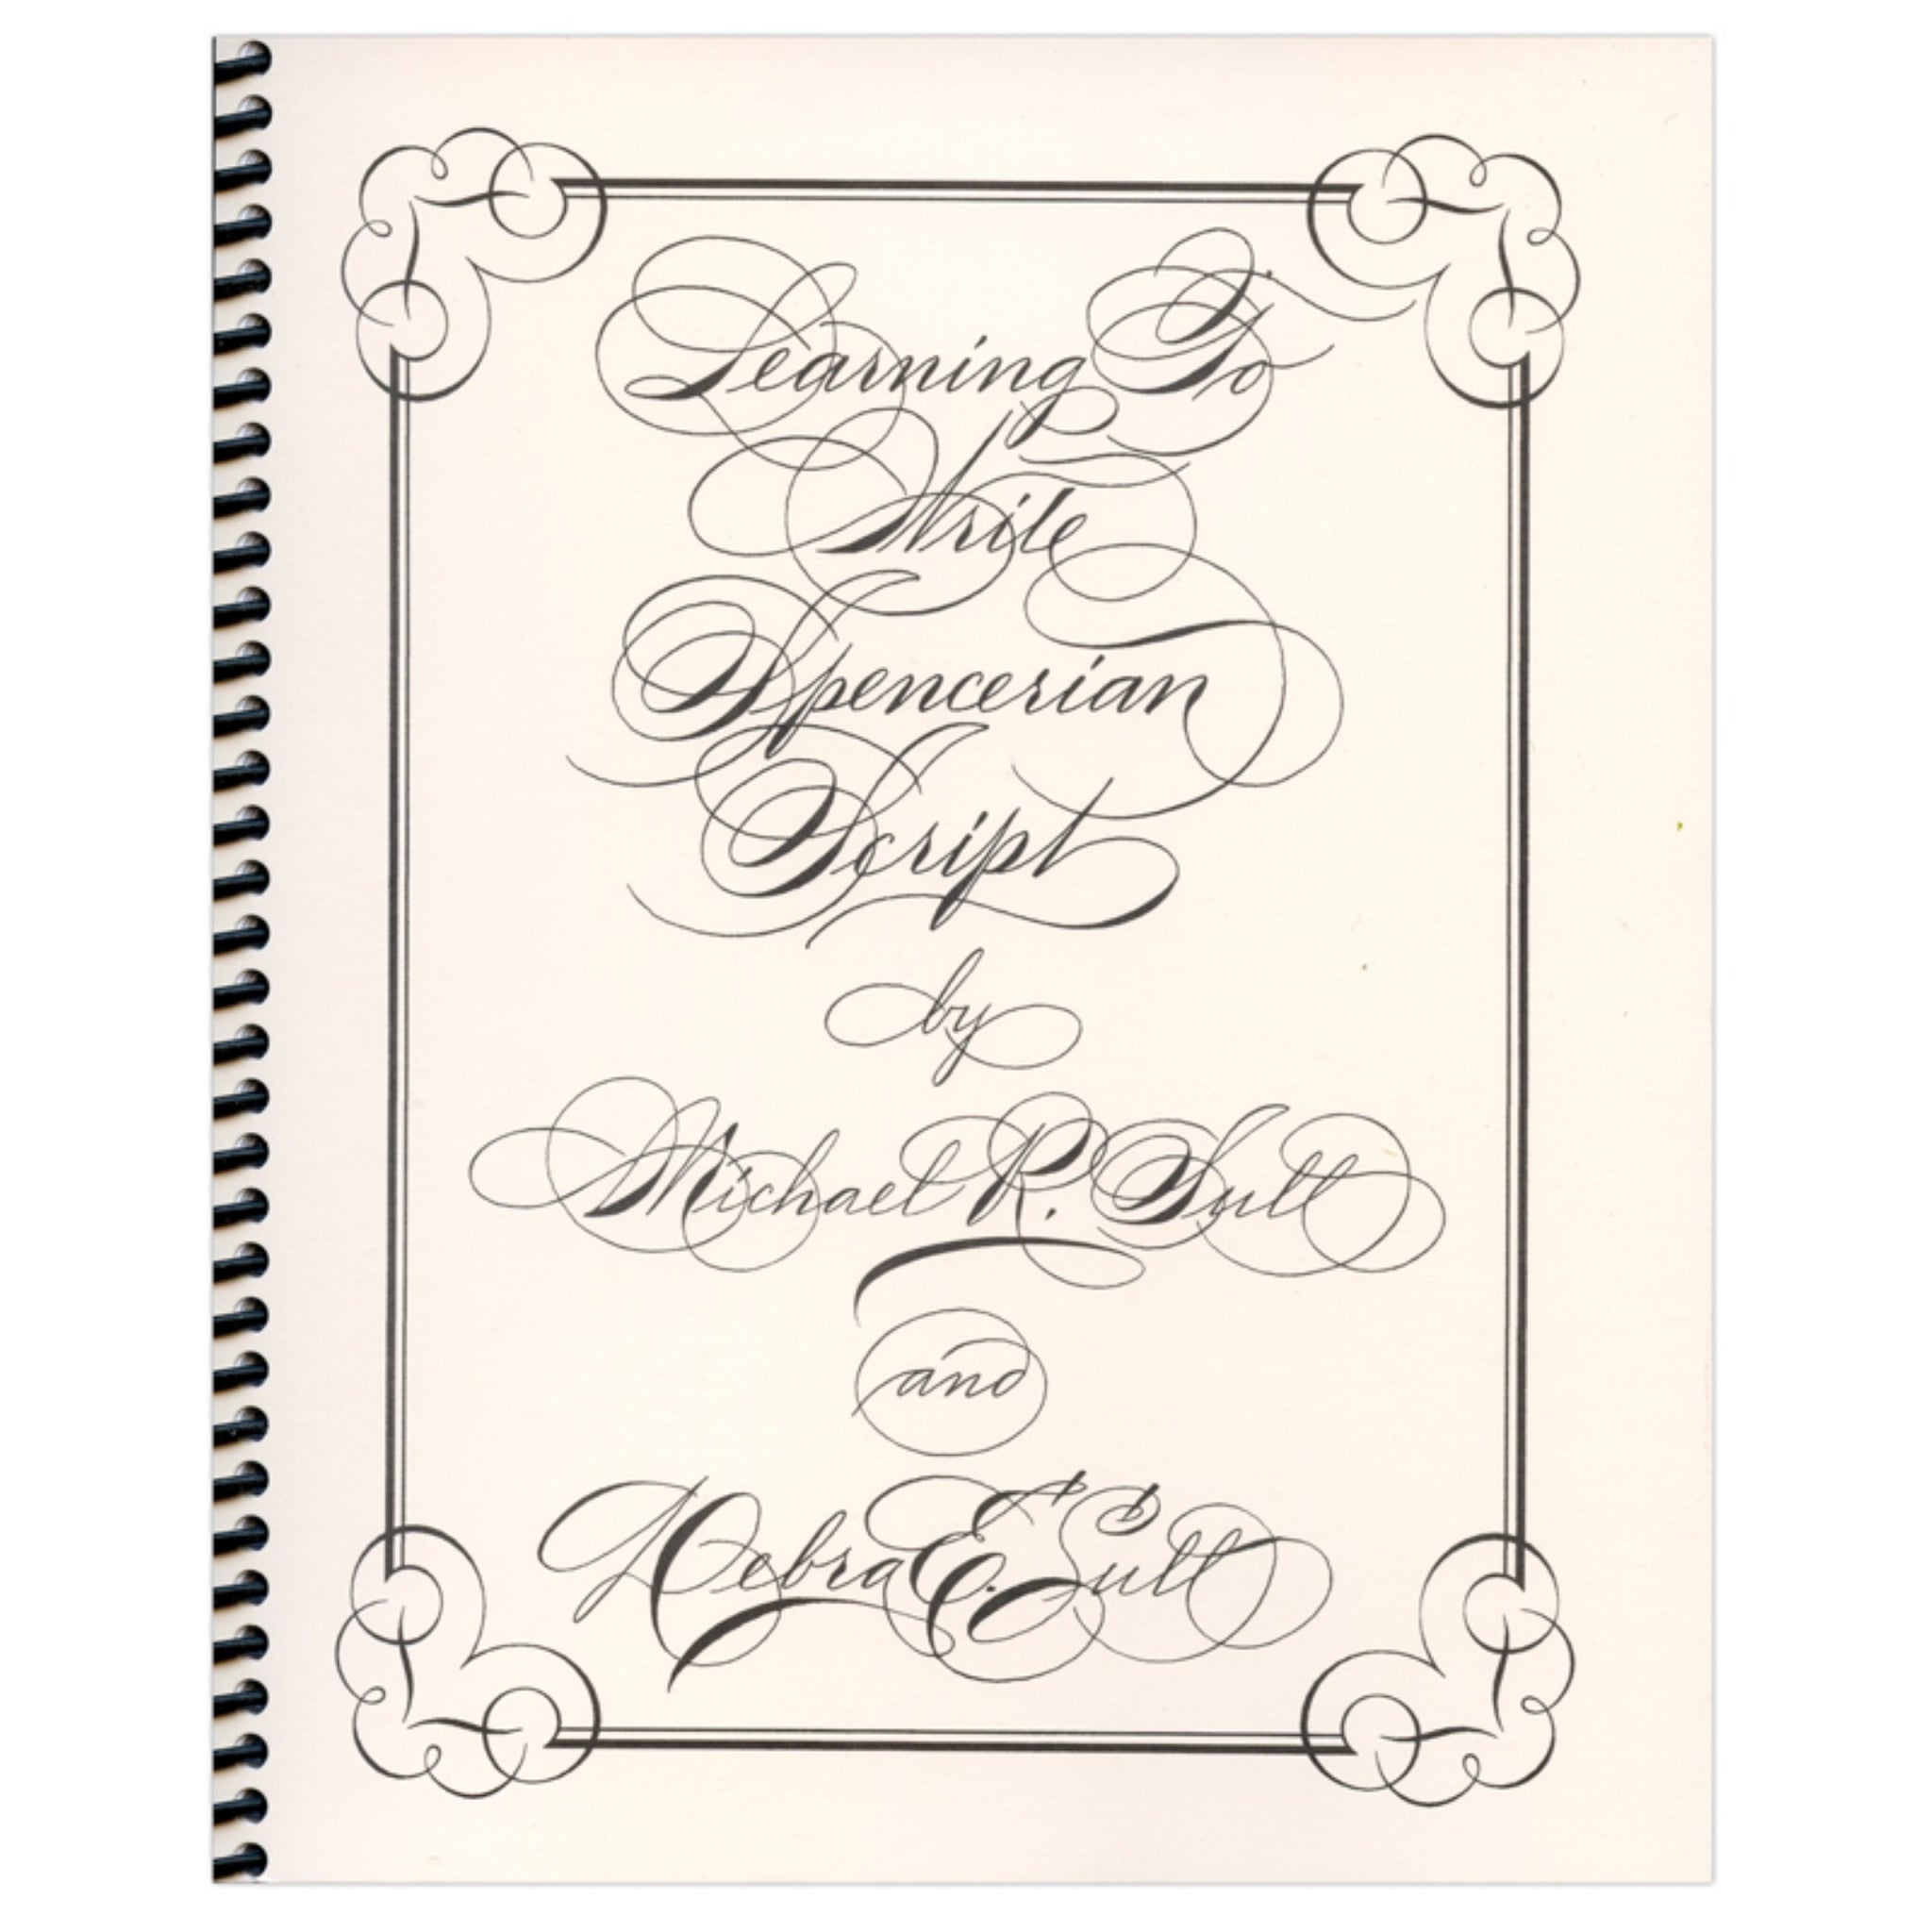 Learning to Write Spencerian Script